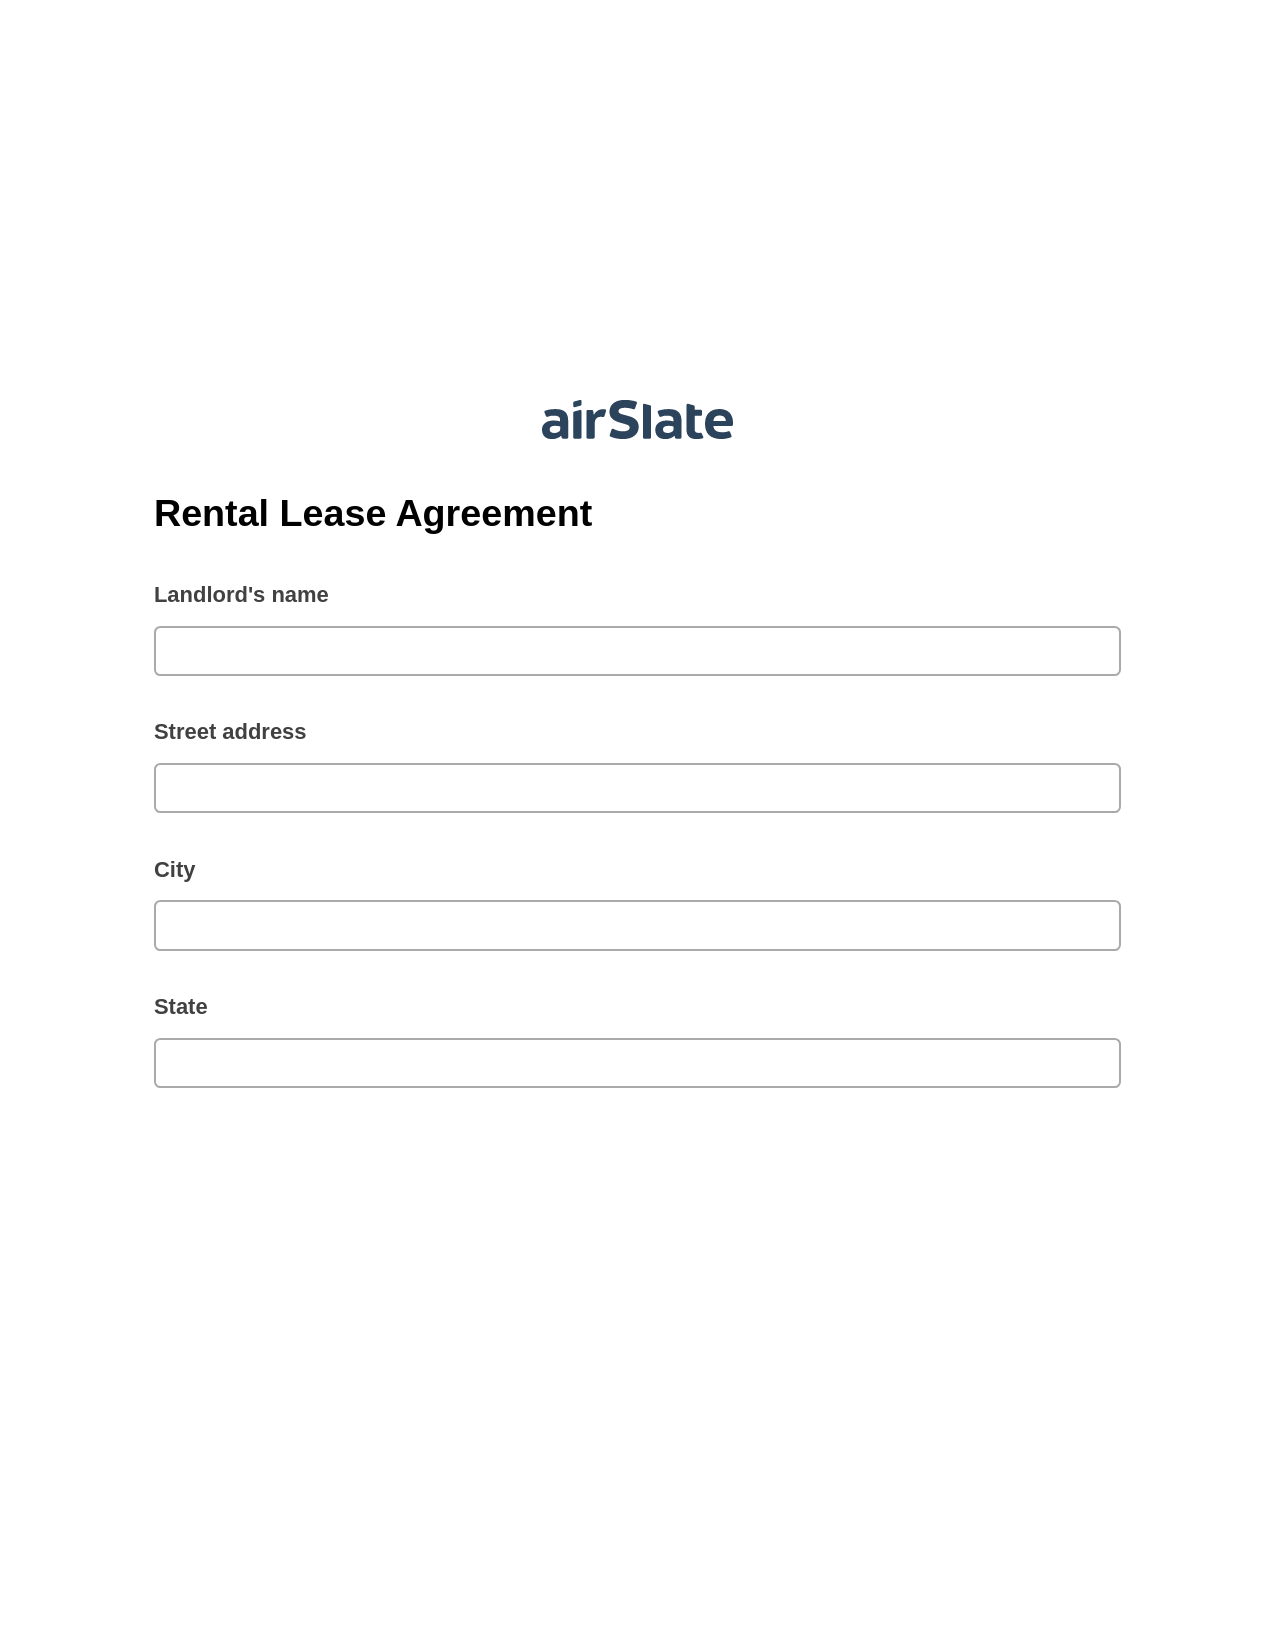 Rental Lease Agreement Pre-fill Dropdown from Airtable, Send a Slate to MS Dynamics 365 Contact Bot, Dropbox Bot